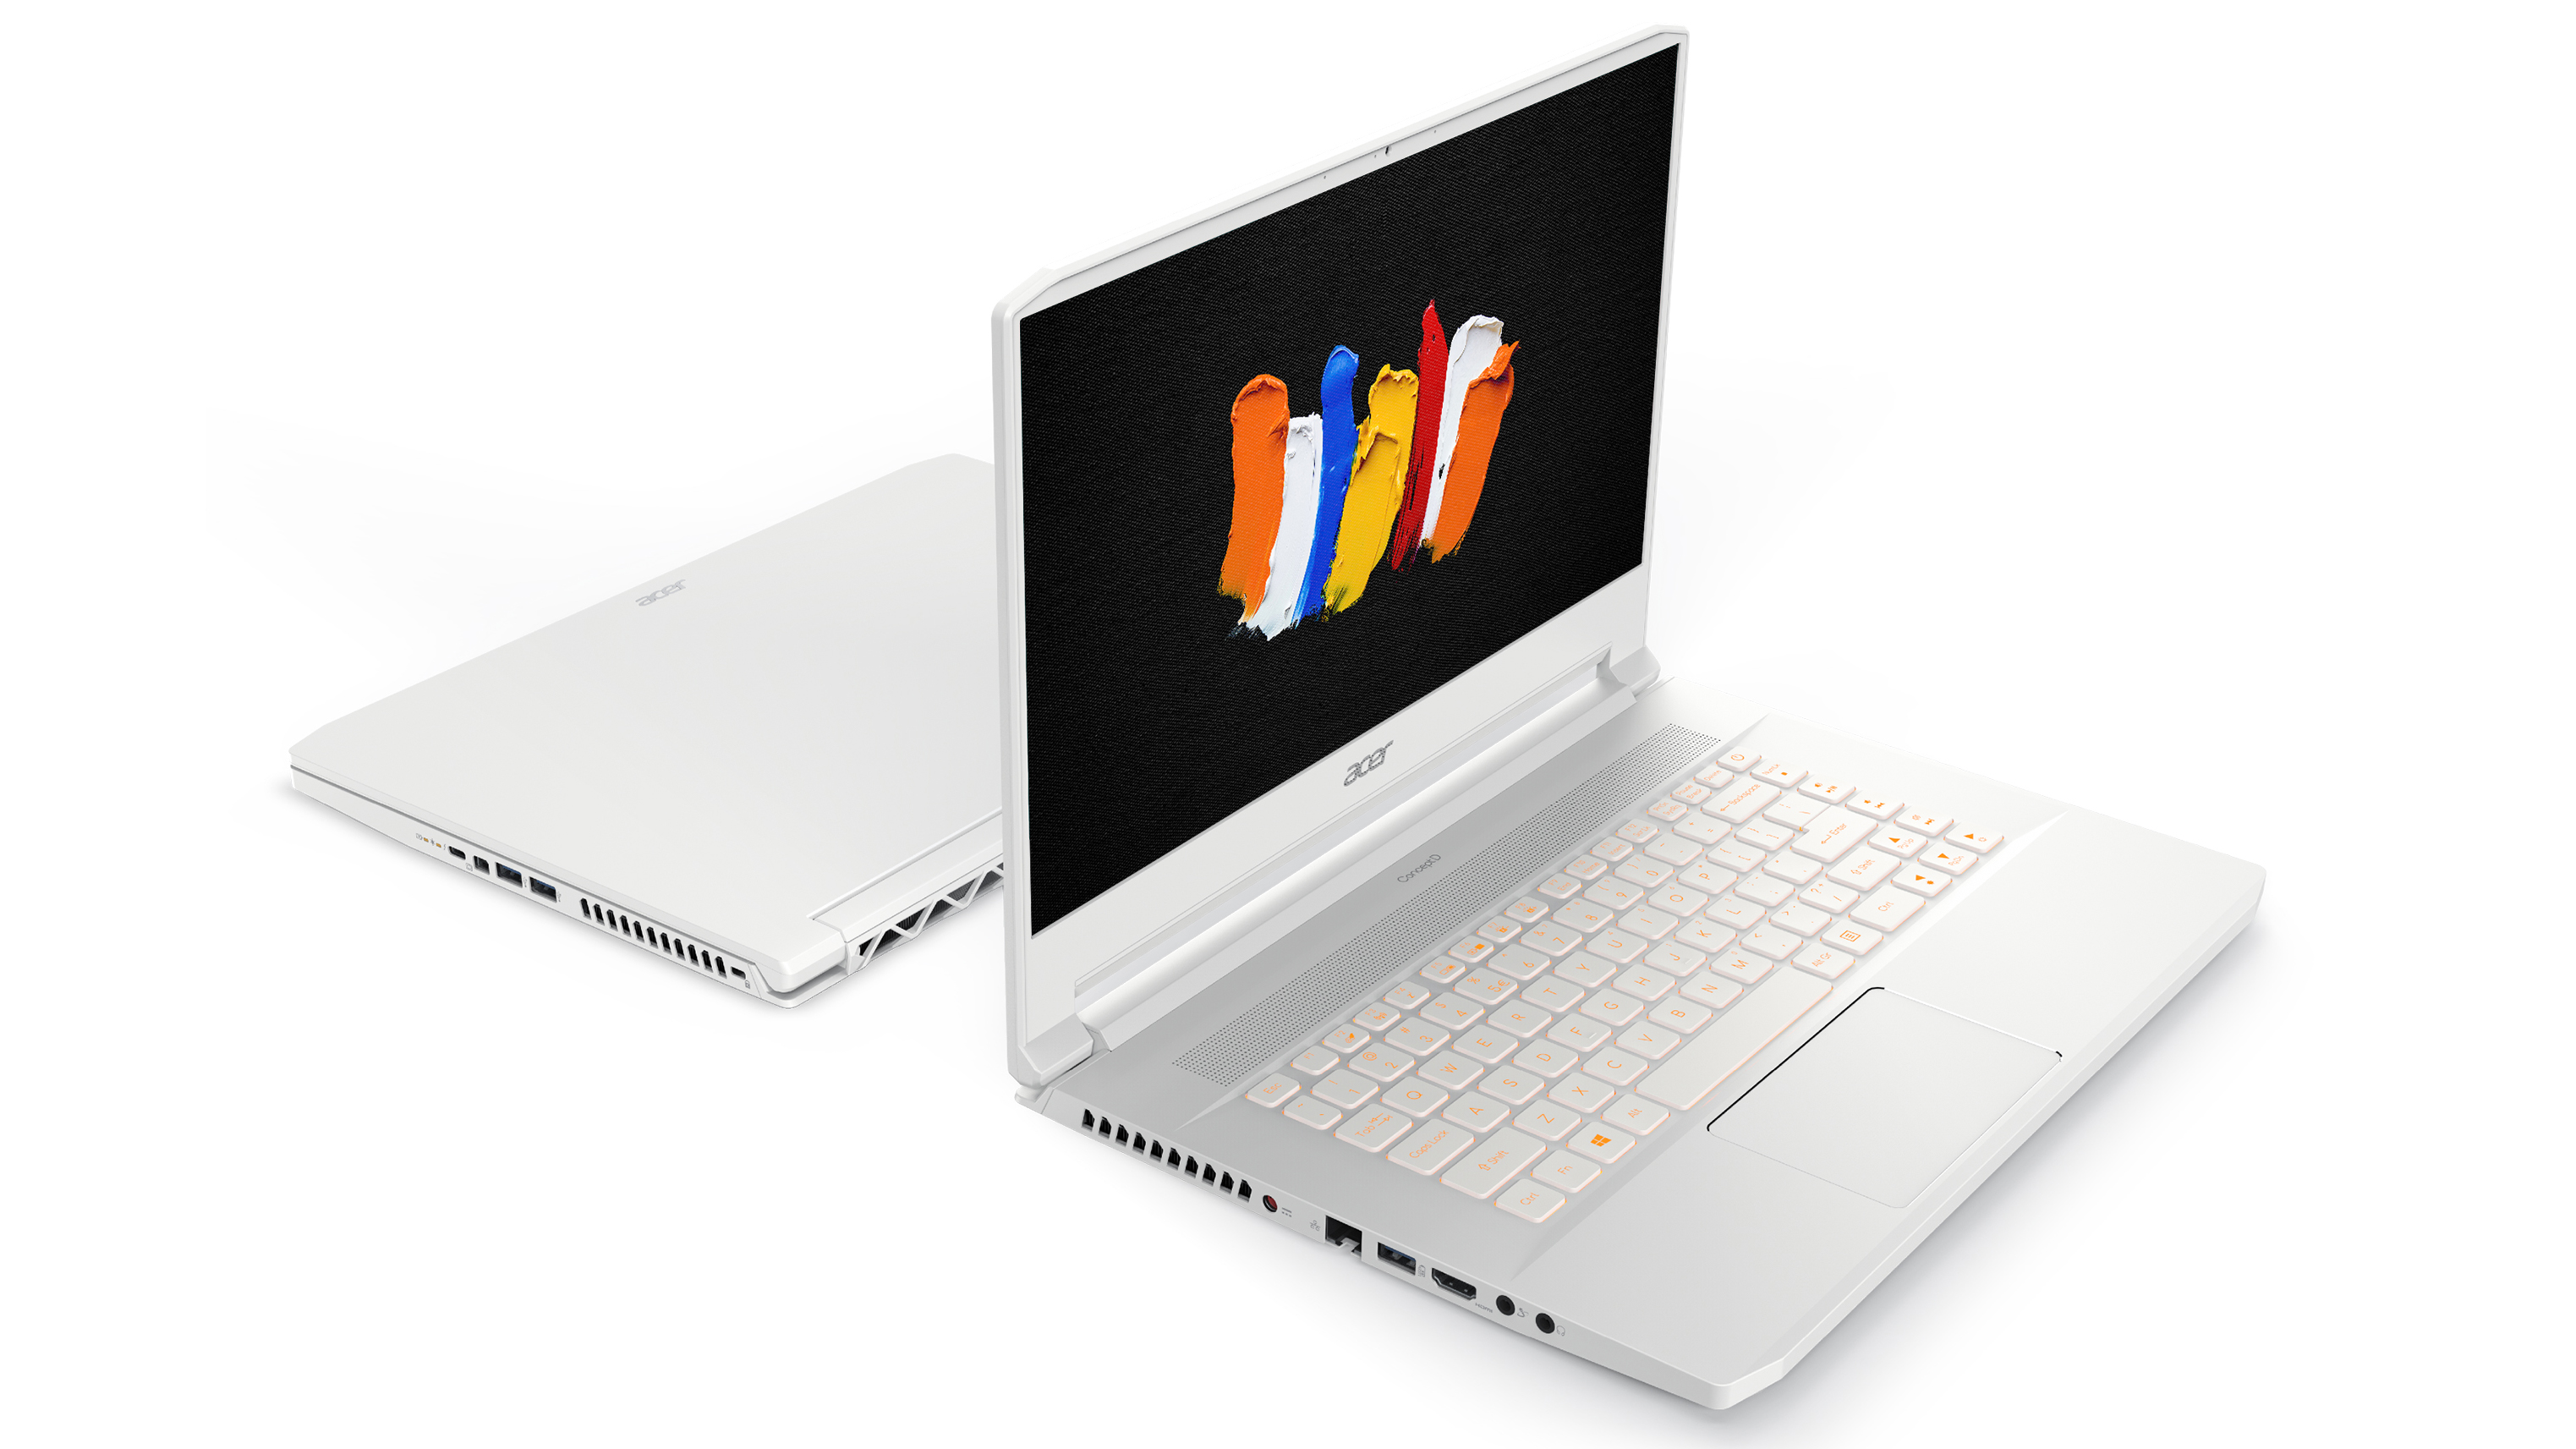 Two Acer ConceptD 7, one open with its screen showing, the other closed, on a white background